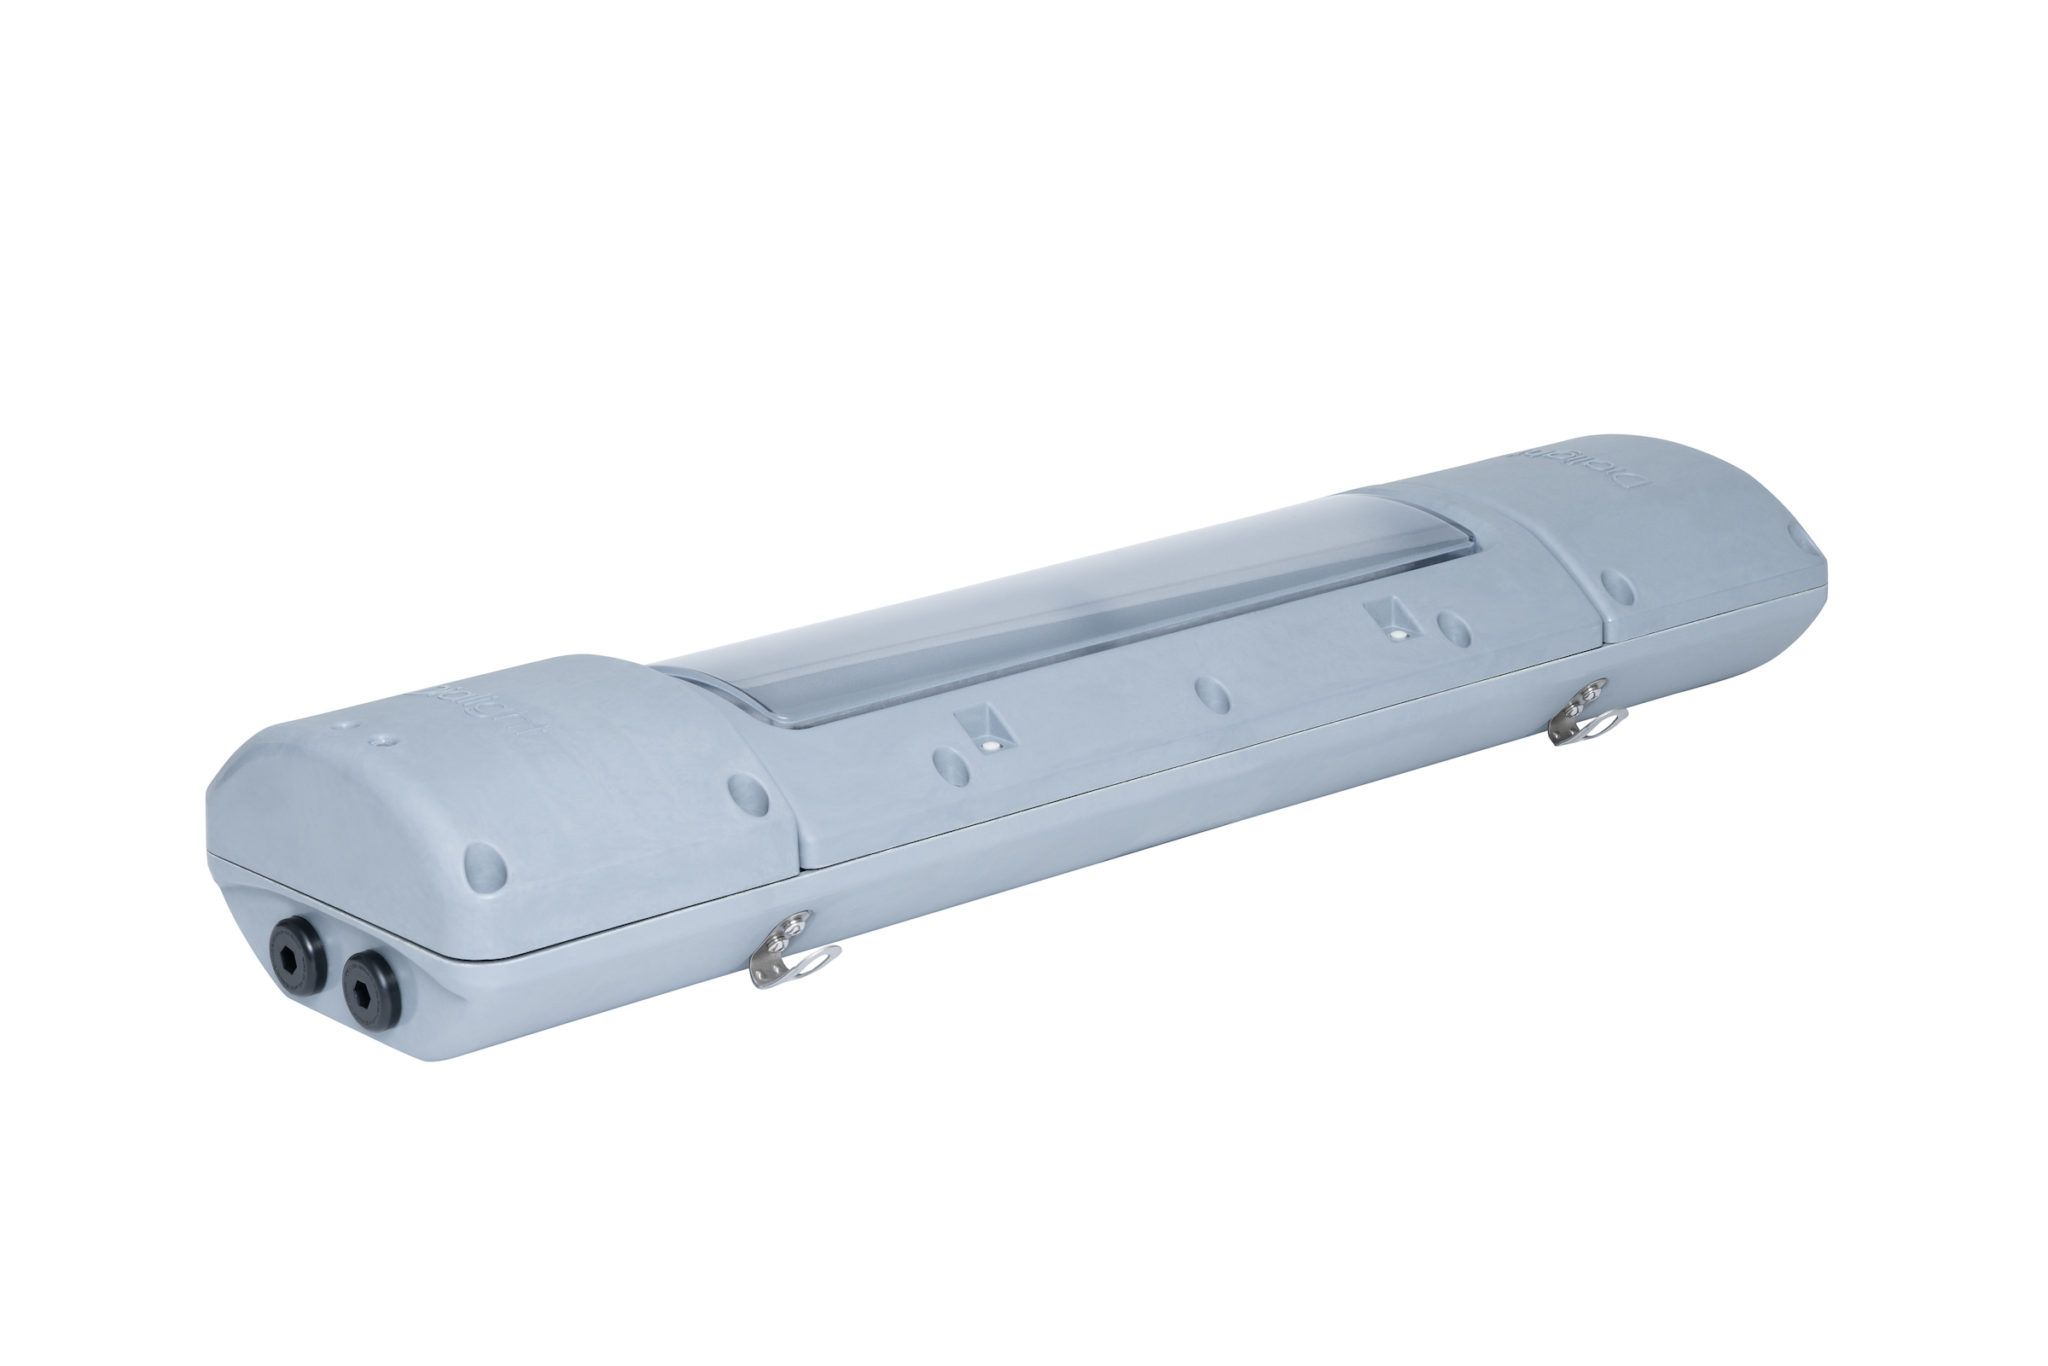 The Dialight SafeSite®GRP Linear comes in both 2' and 4'. Shown here is the 2' version.